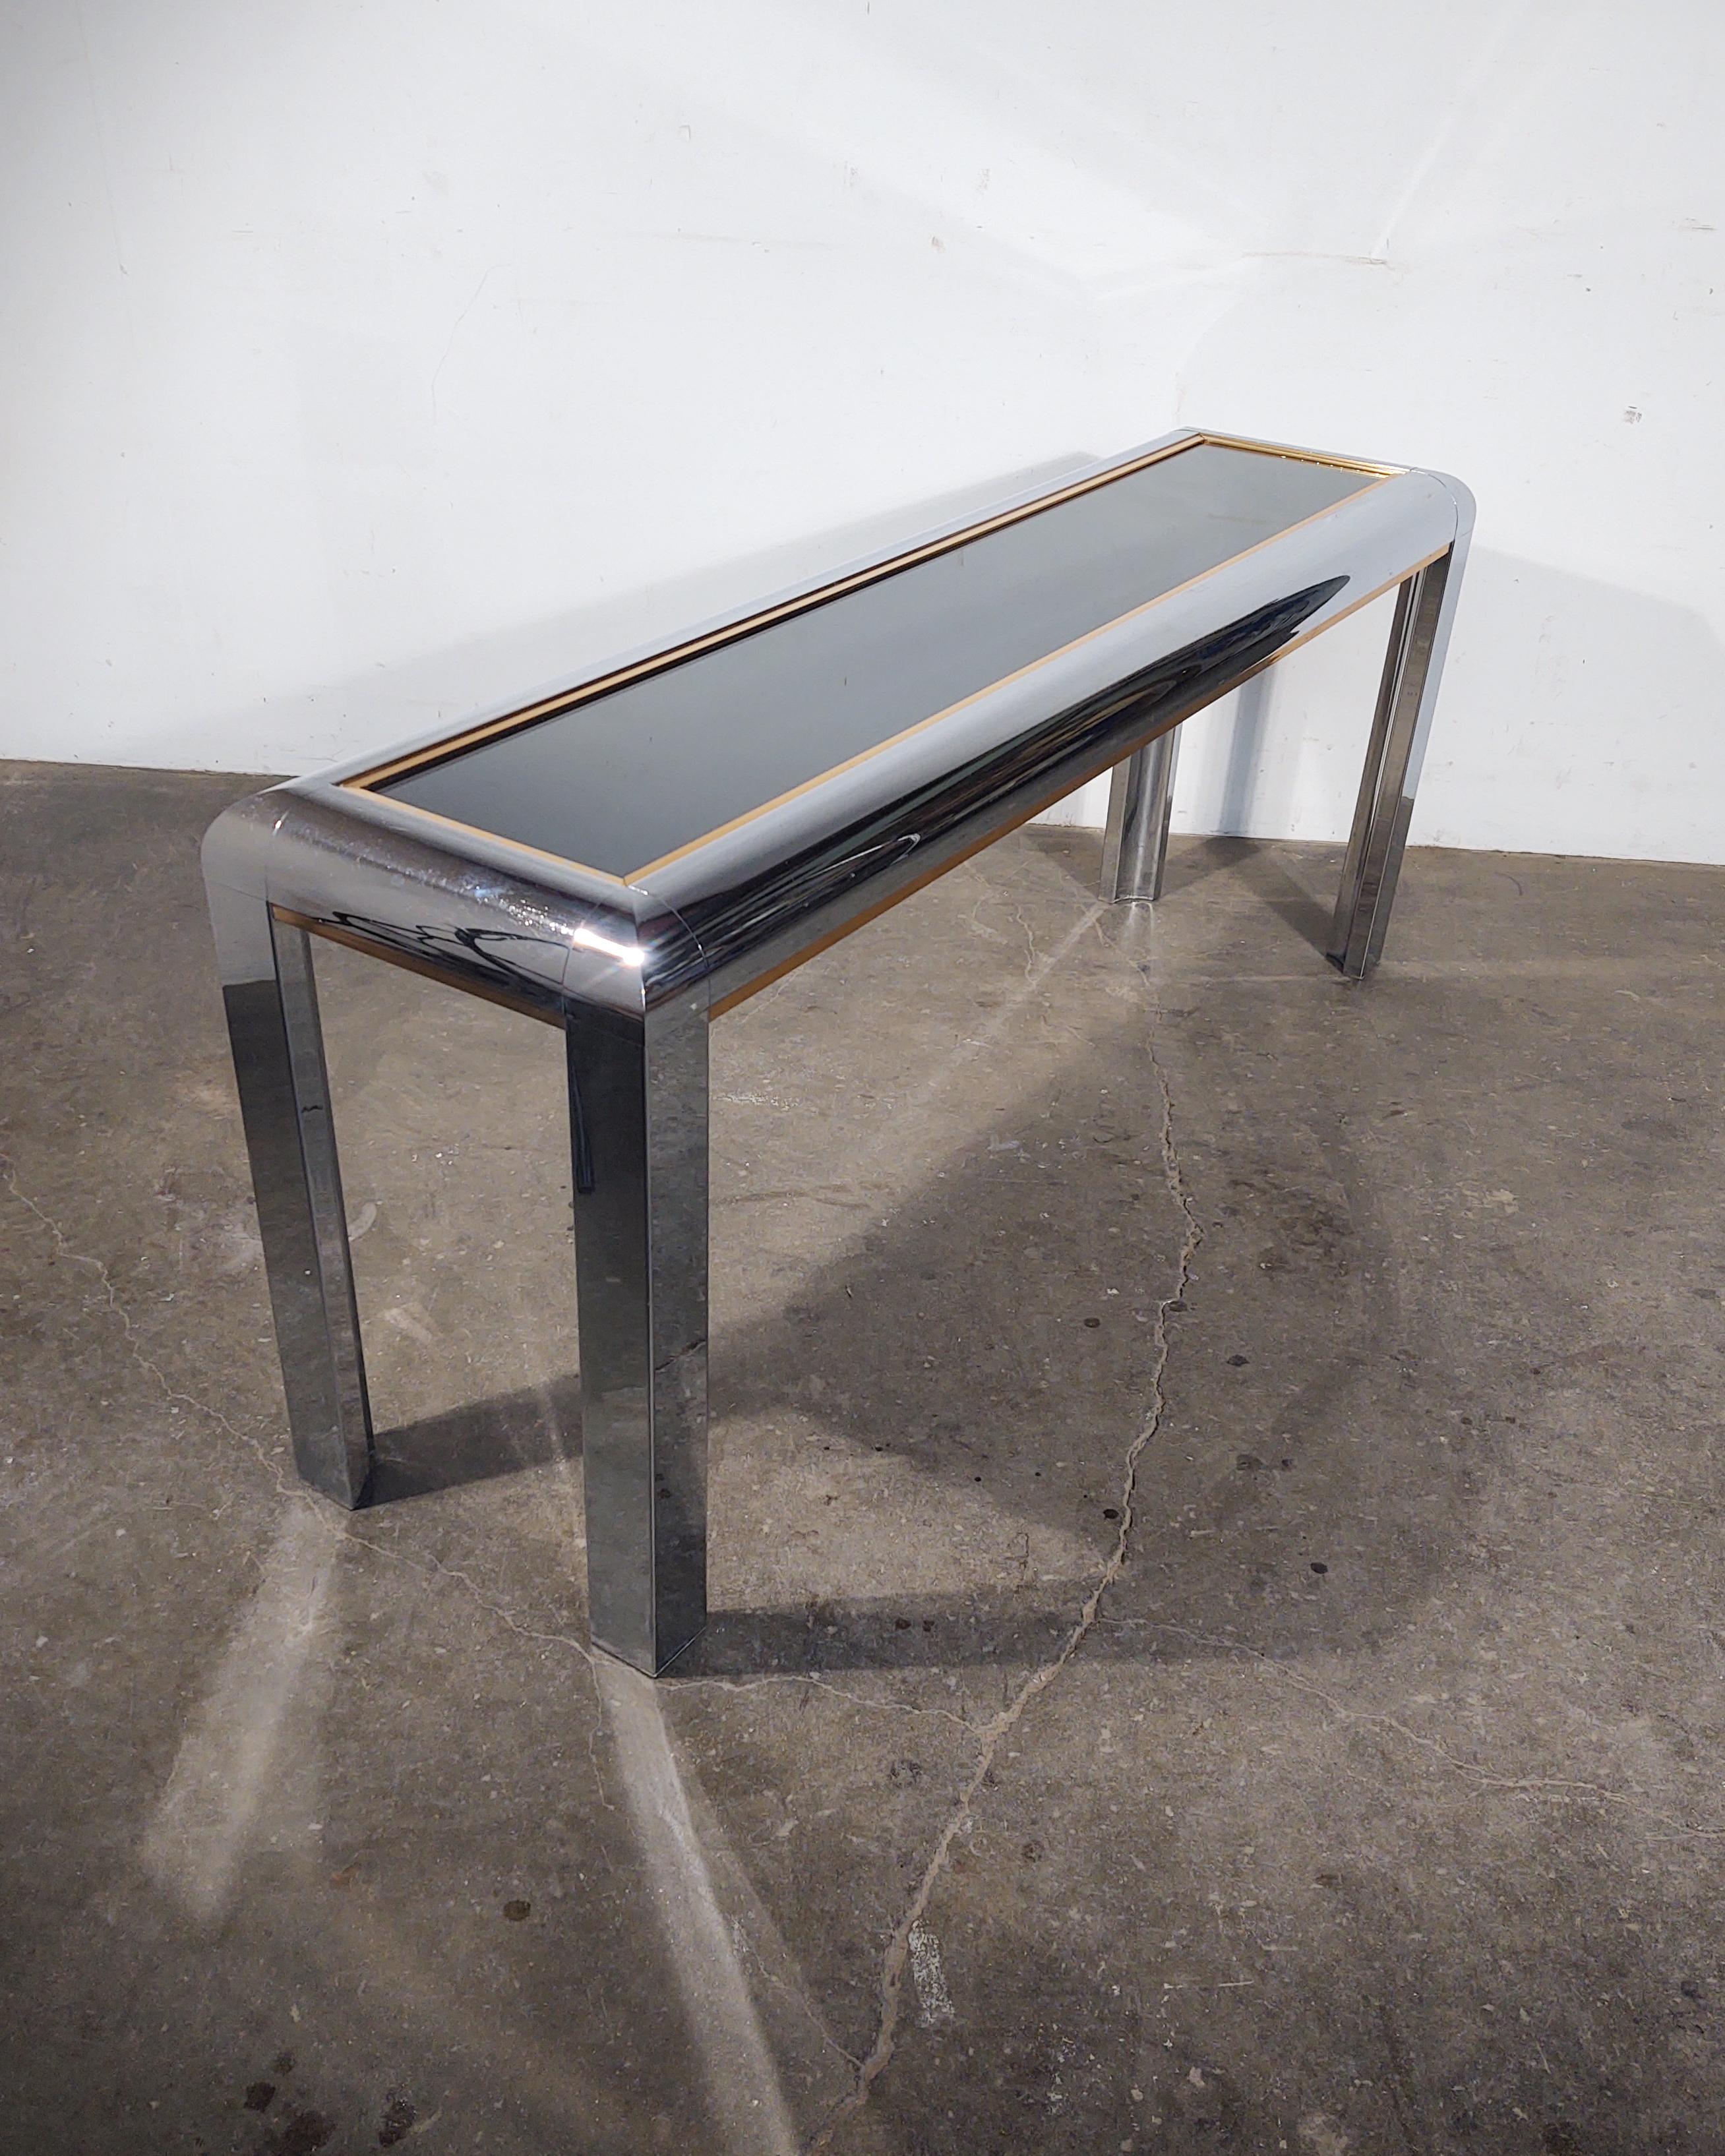 Smoked Glass 1970s Chrome Console Table with Smoky Mirror Top by Milo Baughman